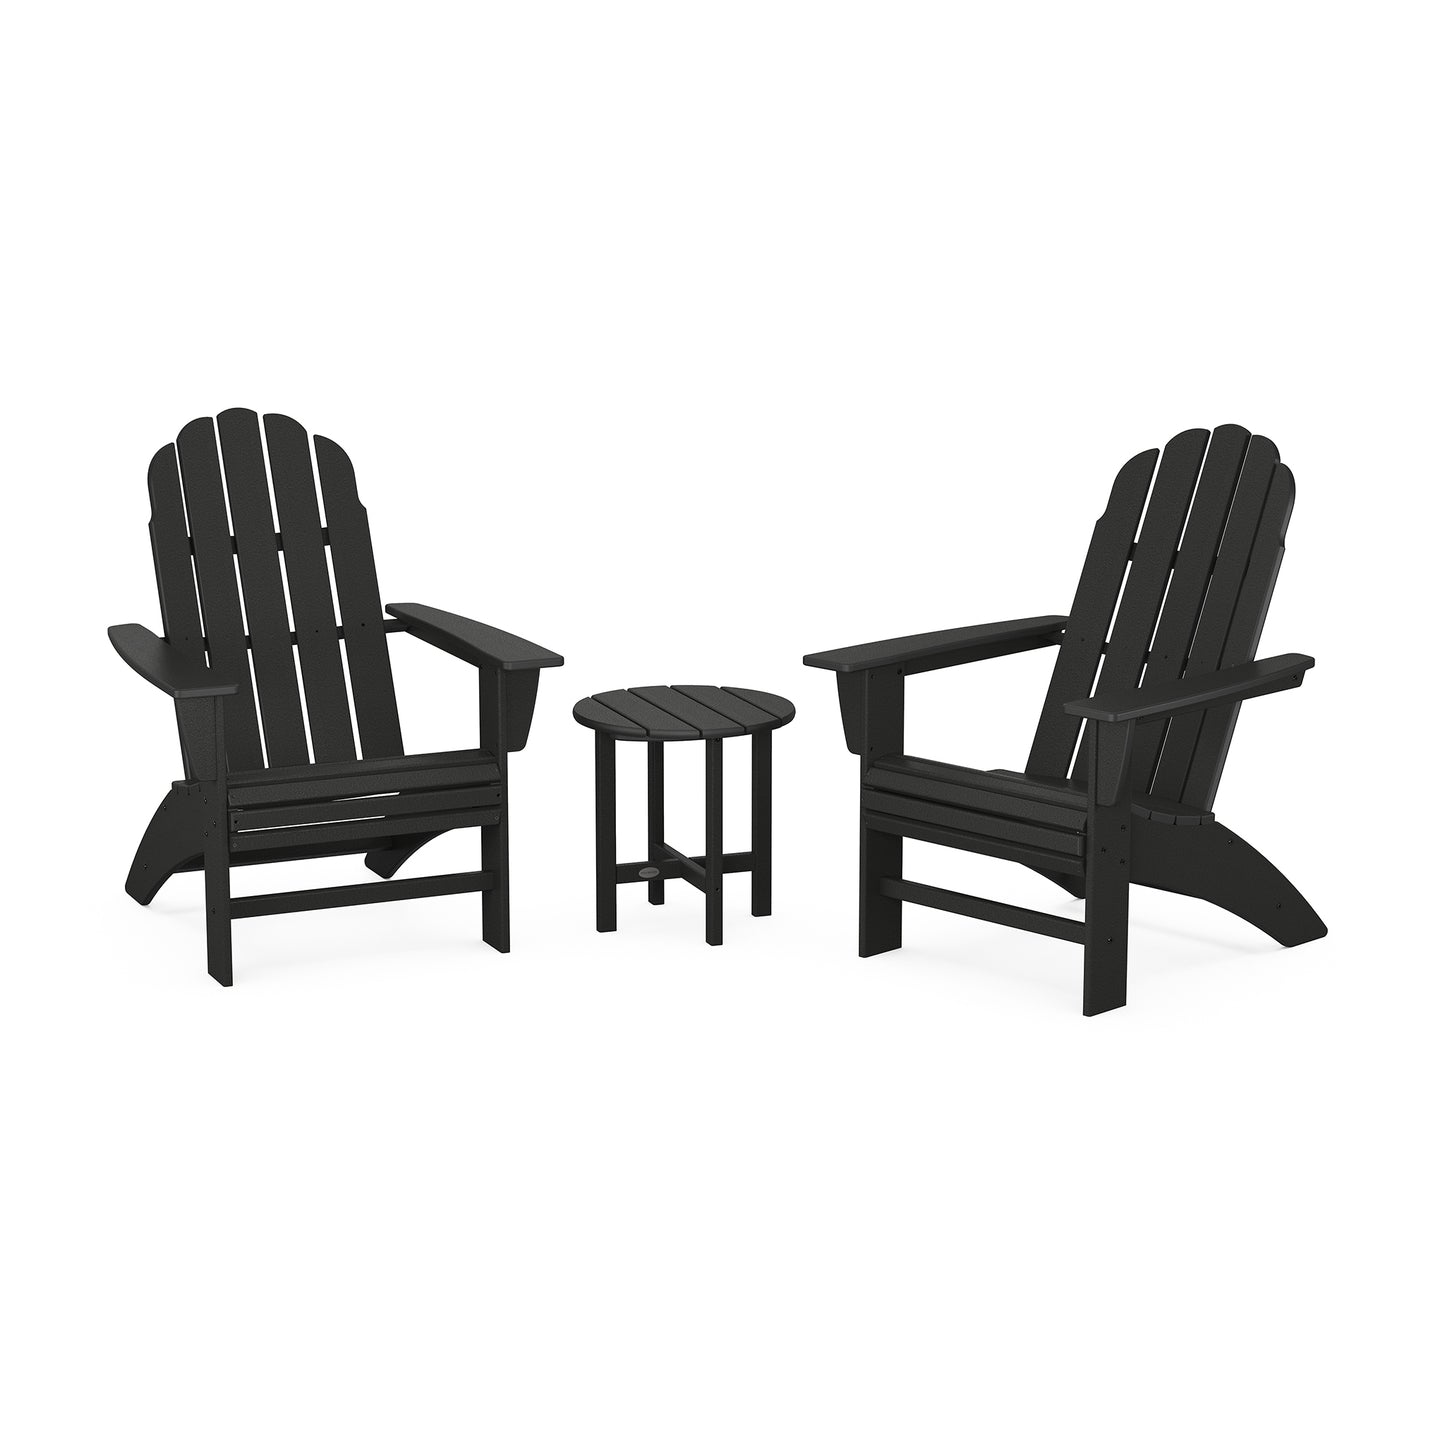 Two black POLYWOOD Vineyard 3-Piece Curveback Adirondack chairs with a matching small round table between them, set against a white background.